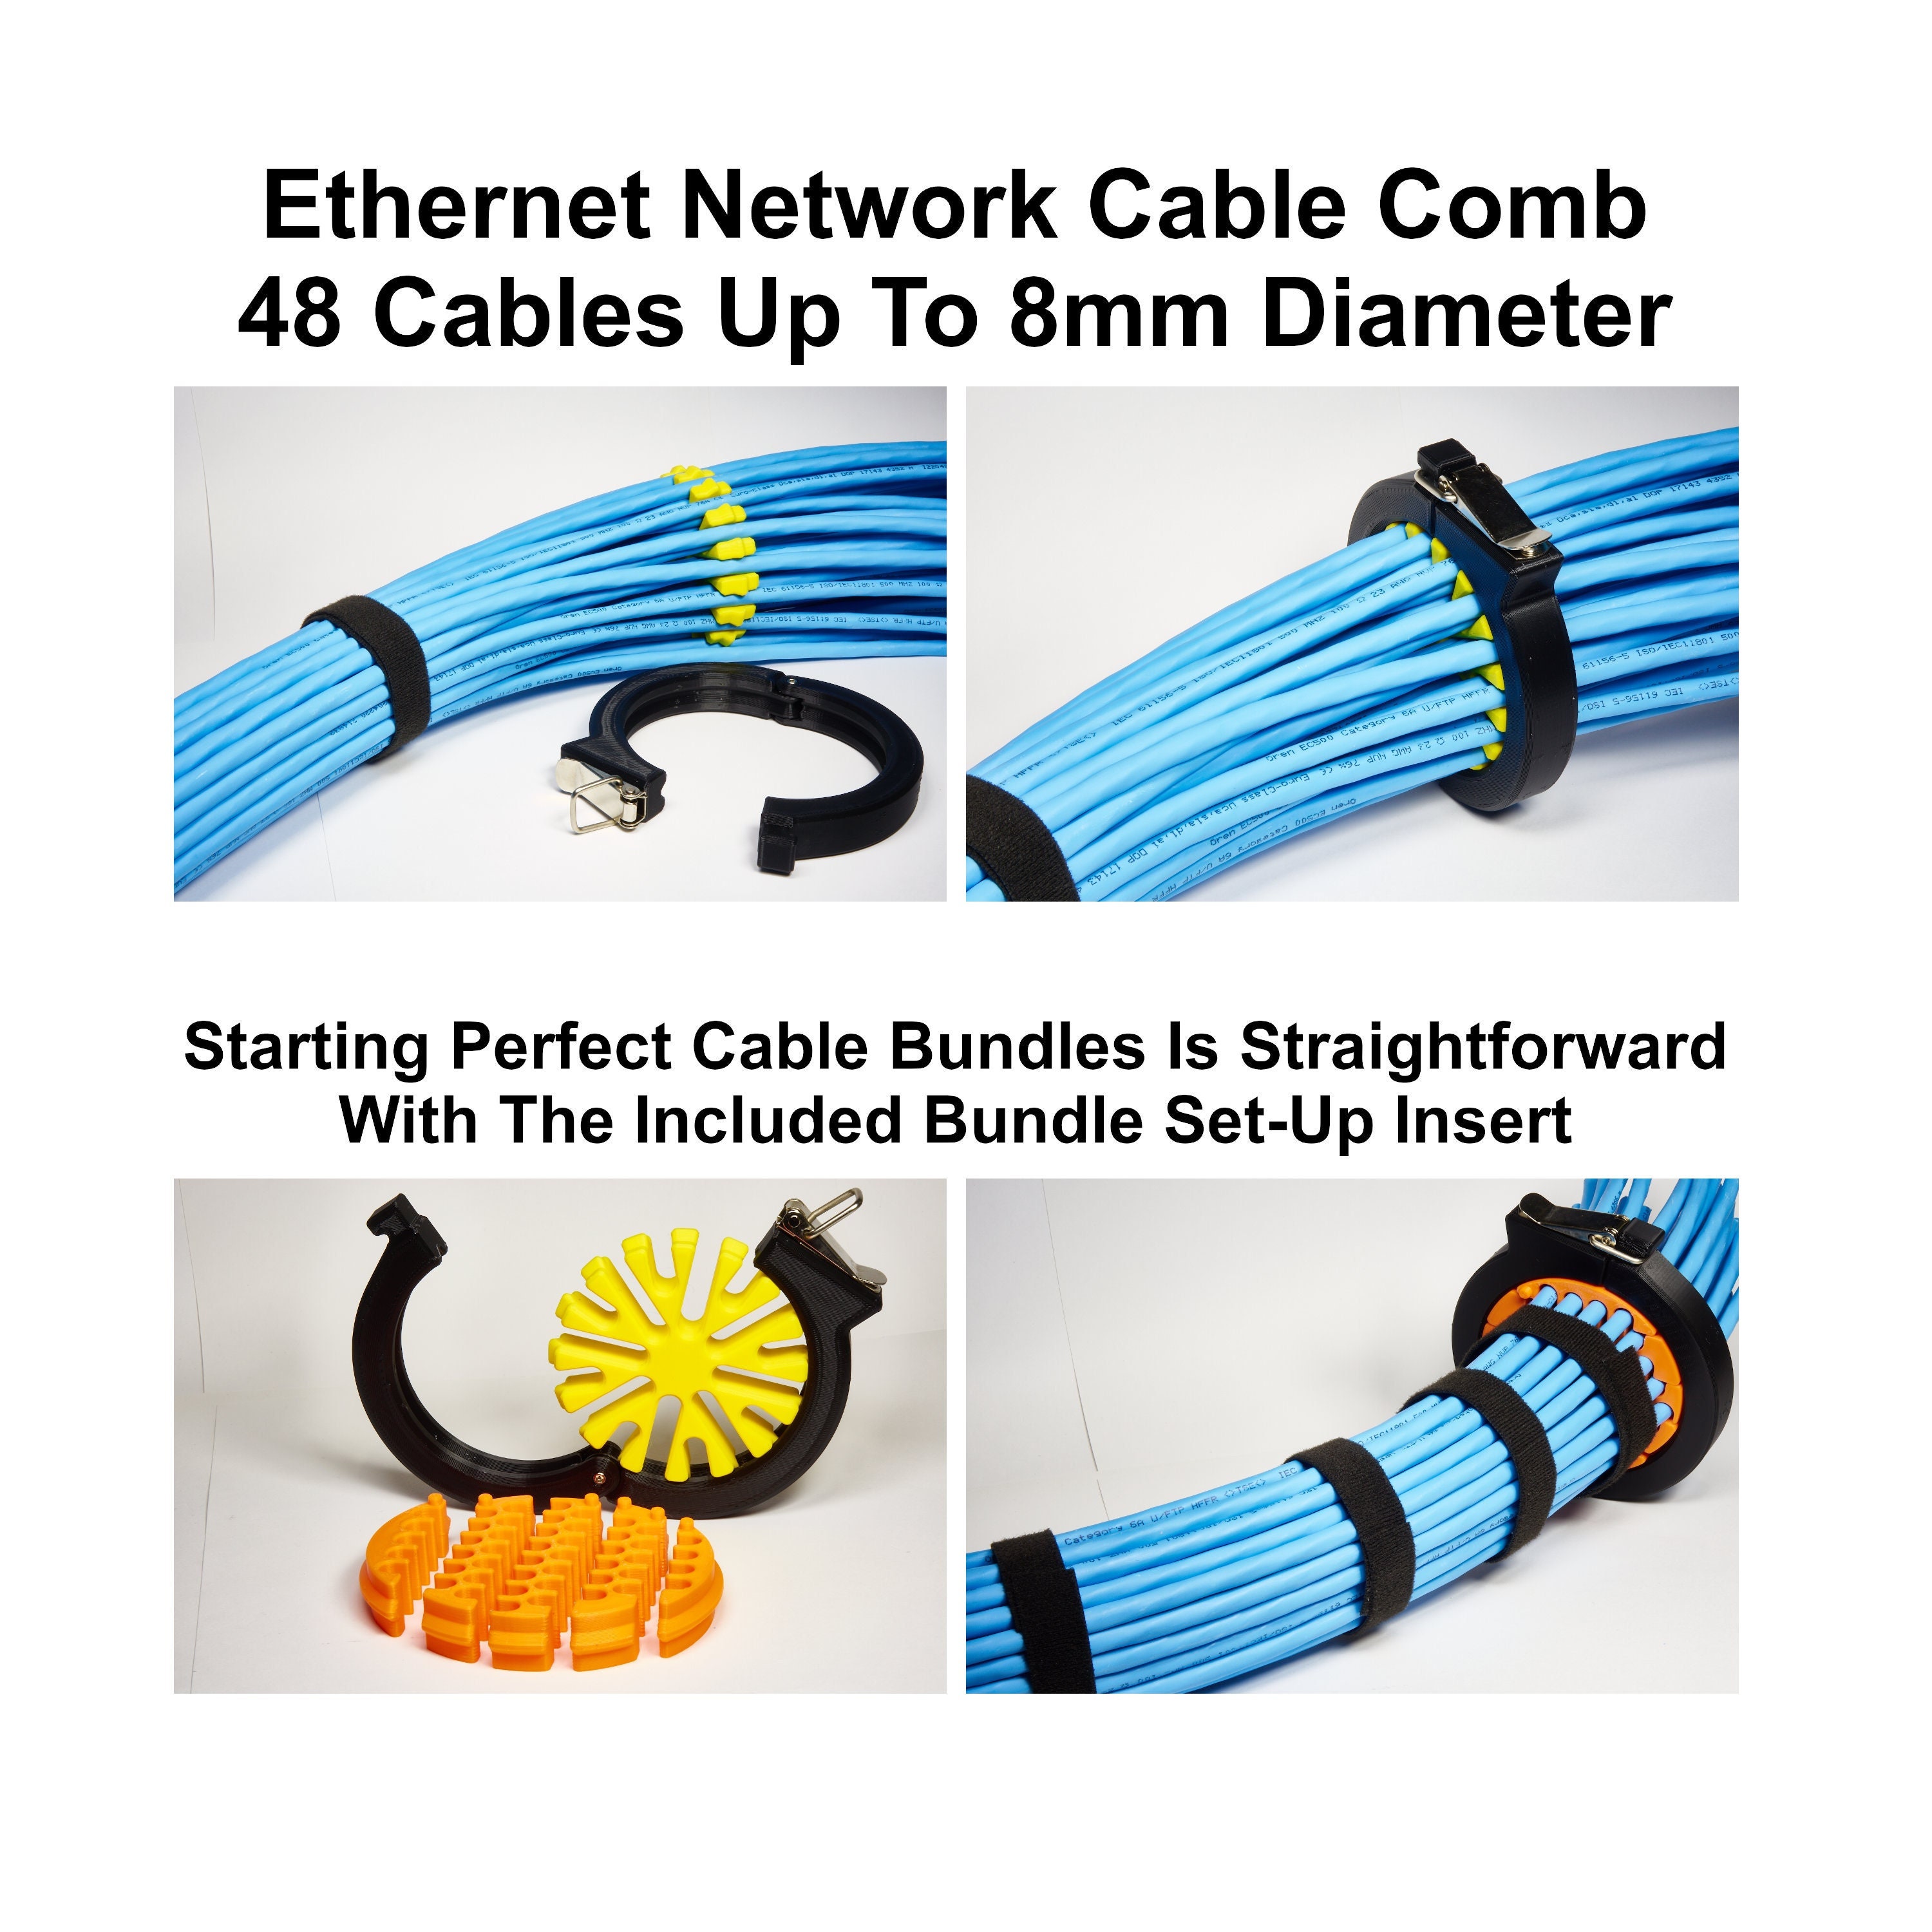 Ethernet Network Cable Comb / Cable Dresser 48 Cables Capacity up to 8mm  Cable Diameter -  Finland